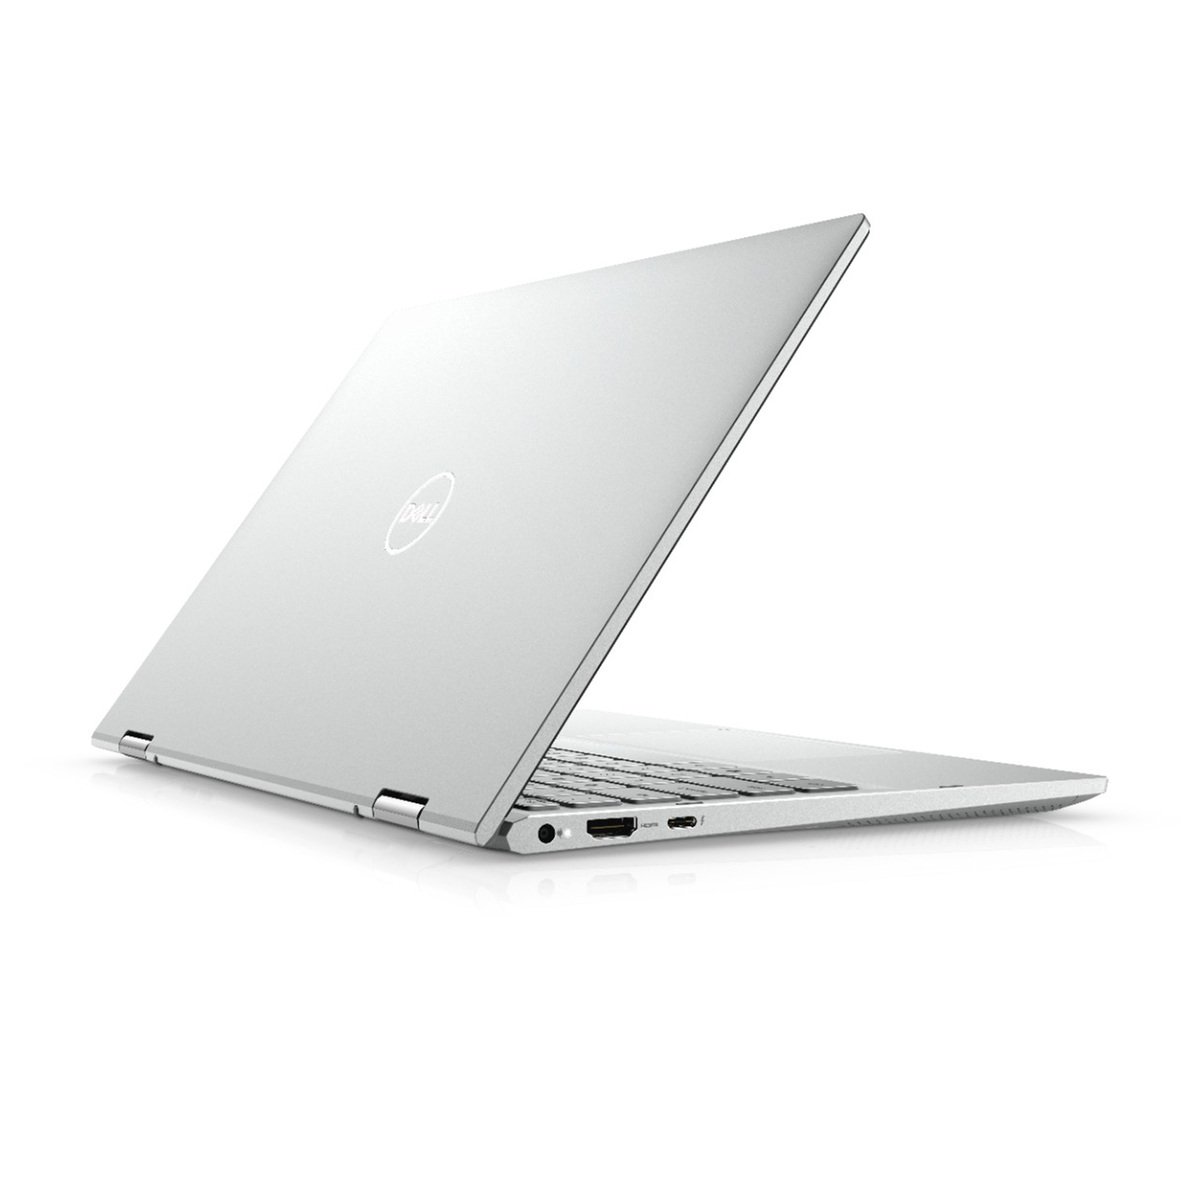 Dell Inspiron 13 (7306-INS-0201-SLV) 2in1 Laptop, Intel Core i7-1165G7, 16GB RAM, 1TB SSD, Intel Iris Xe Shared Graphics, 13.3" Full HD Touch Display, Windows 10, Silver